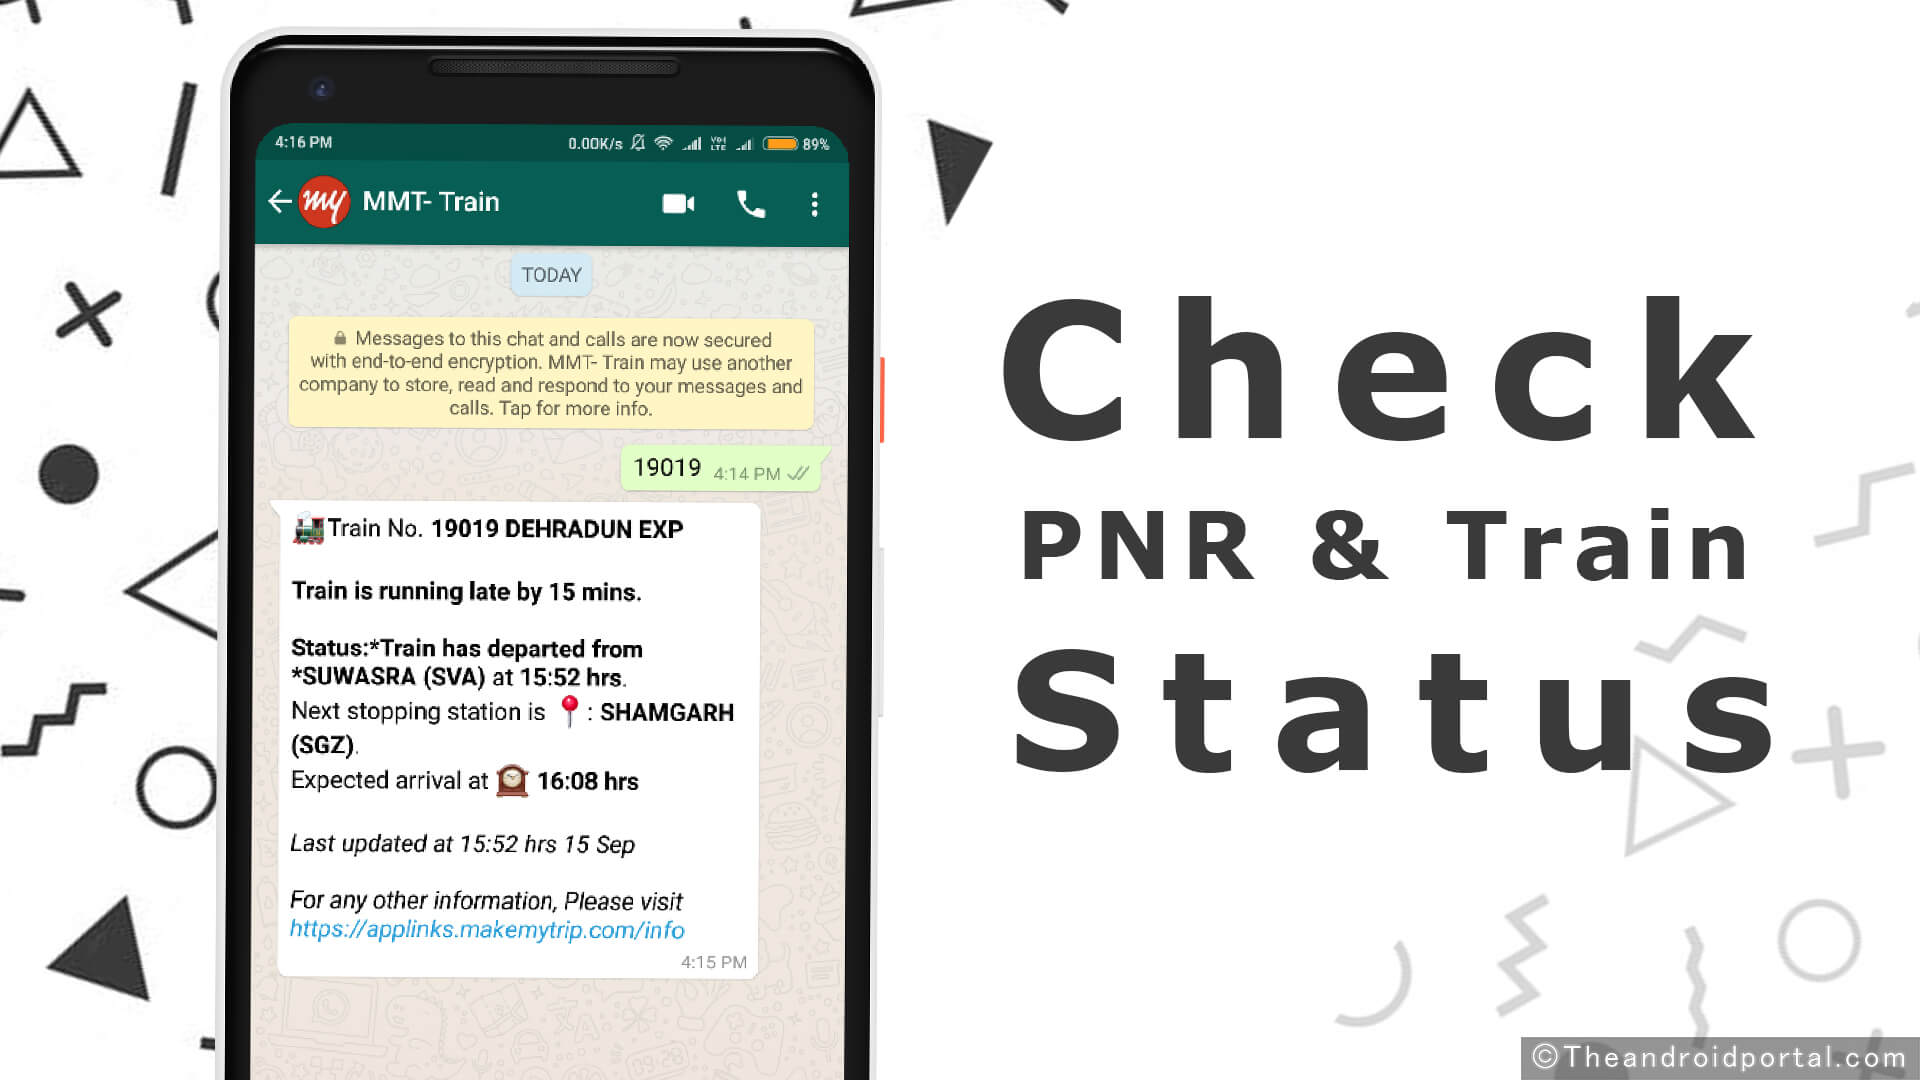 Indian Railways news: This is the way to view PNR status directly on WhatsApp, get real time information - Business League